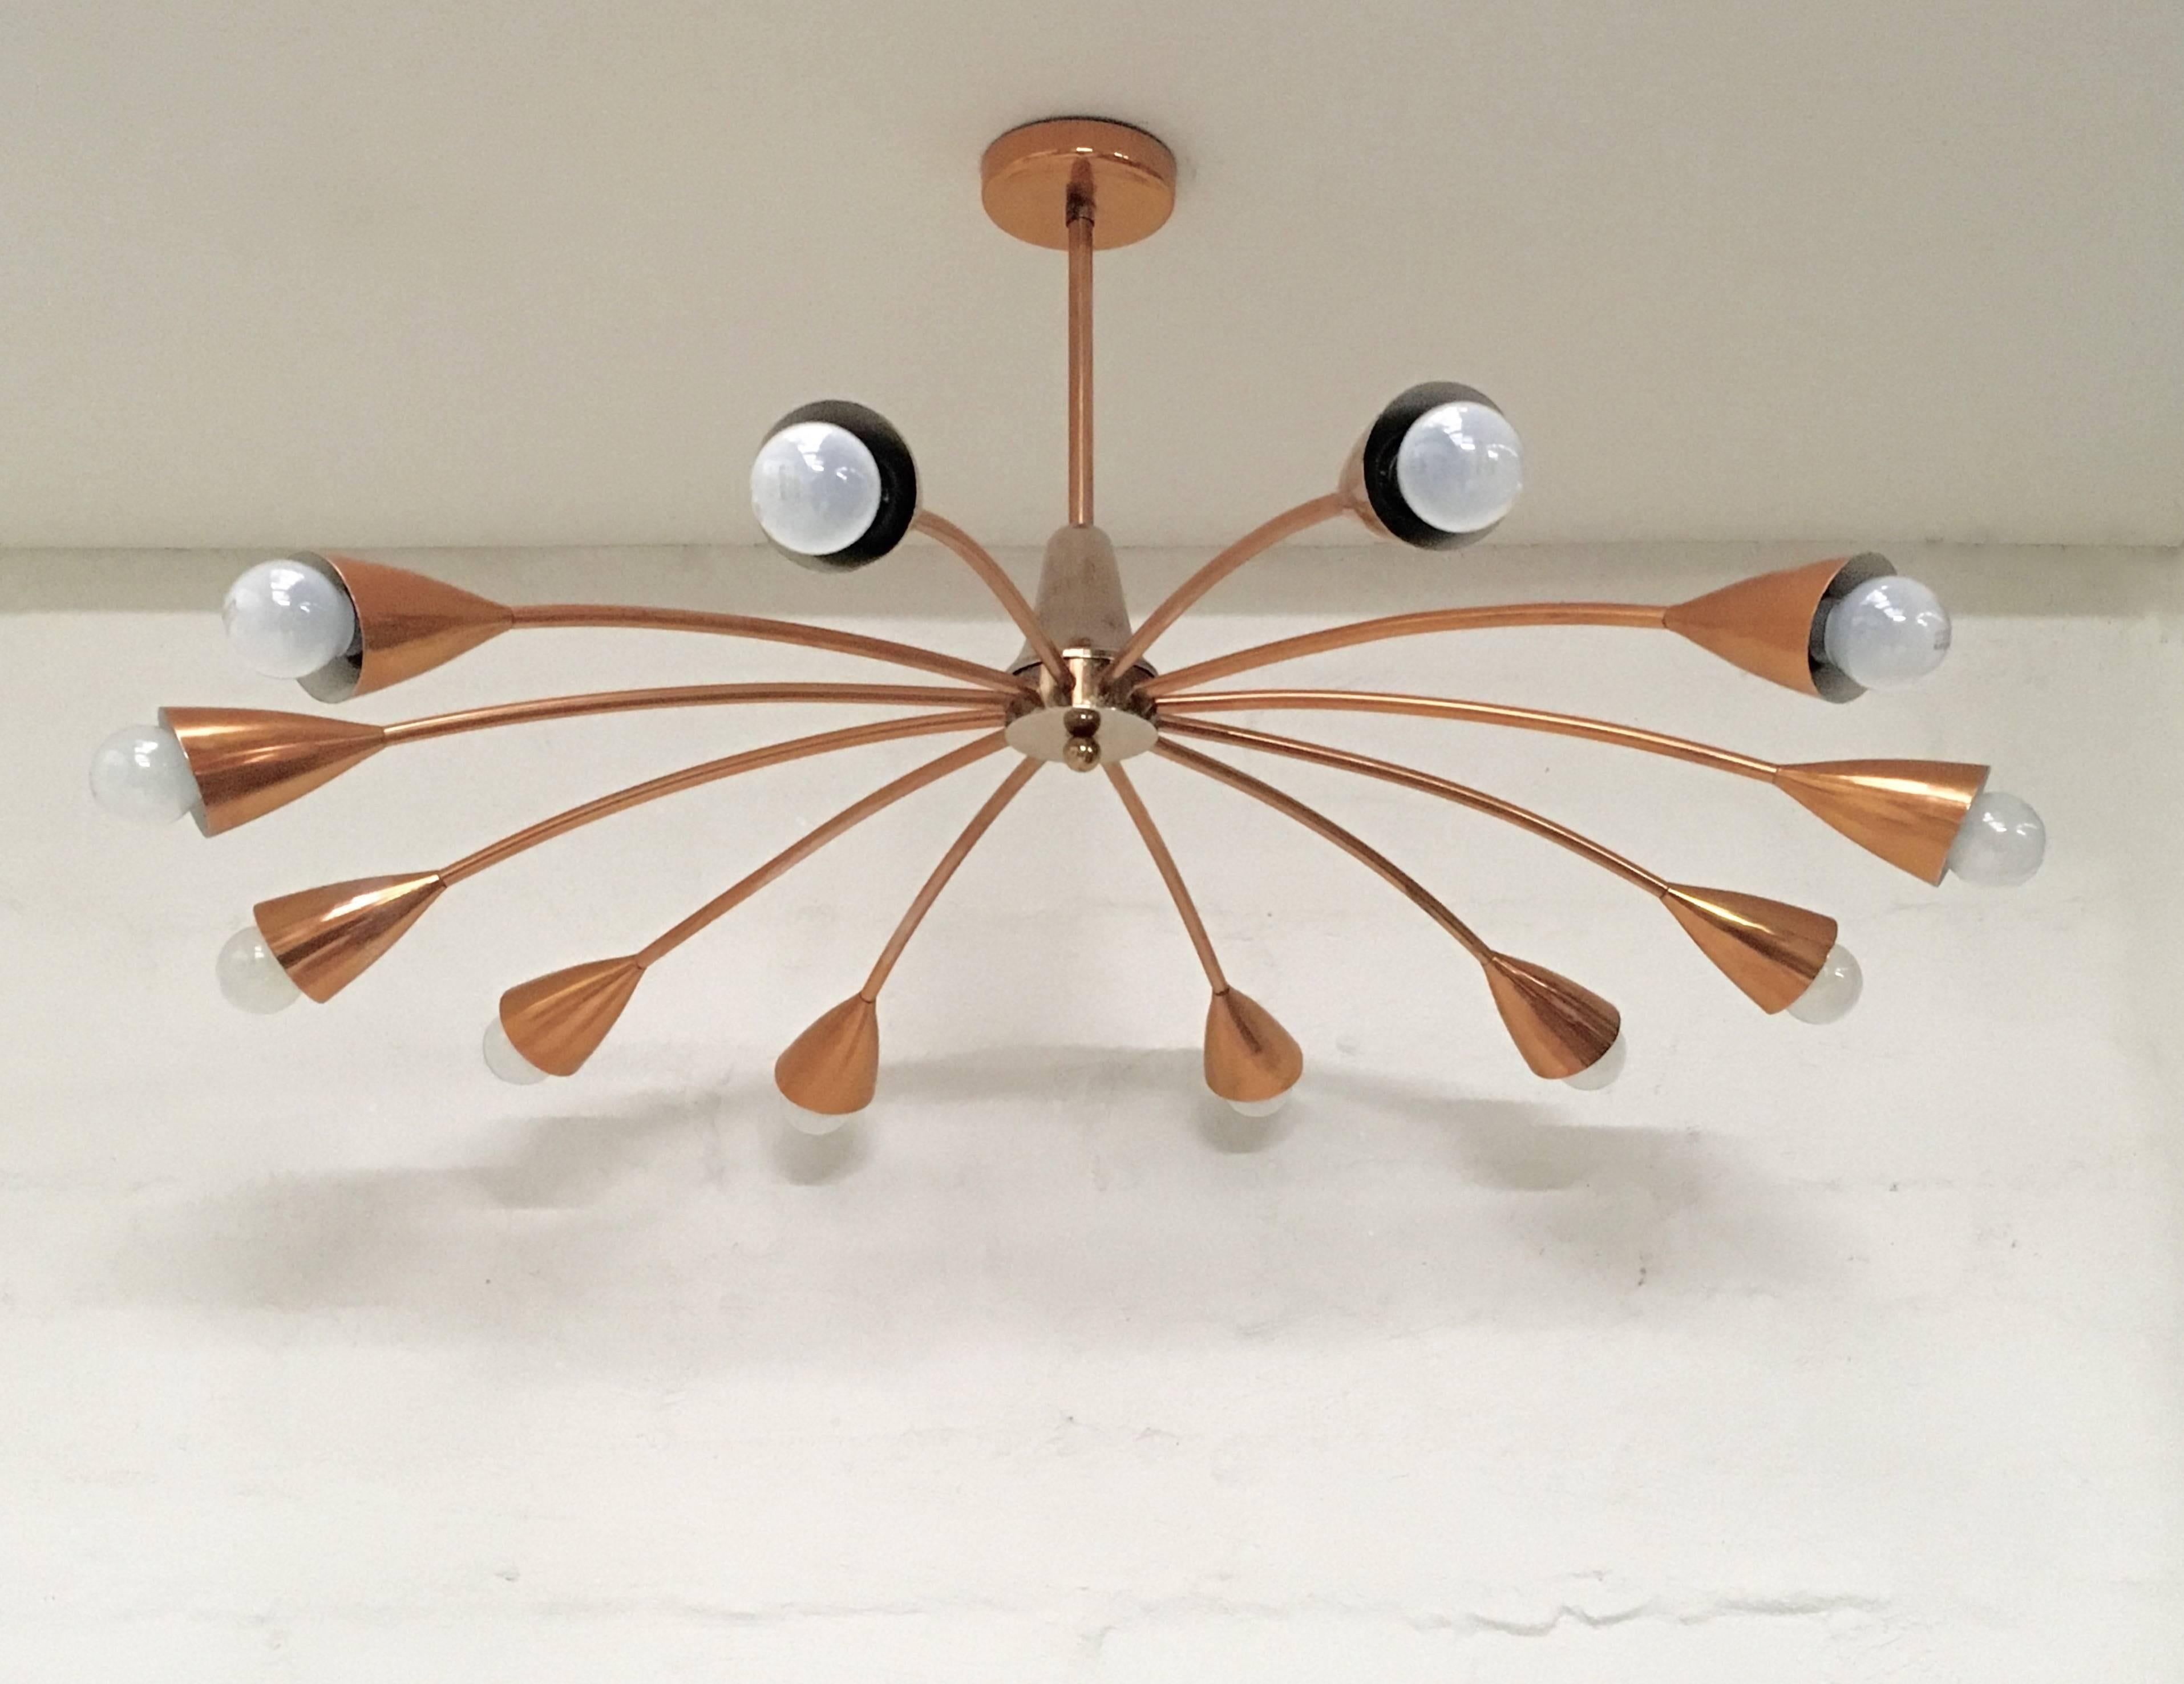 Australian Brown Evans and Co. 'BECO' Copper Chandelier for Anatol Kagan, Melbourne 1950s